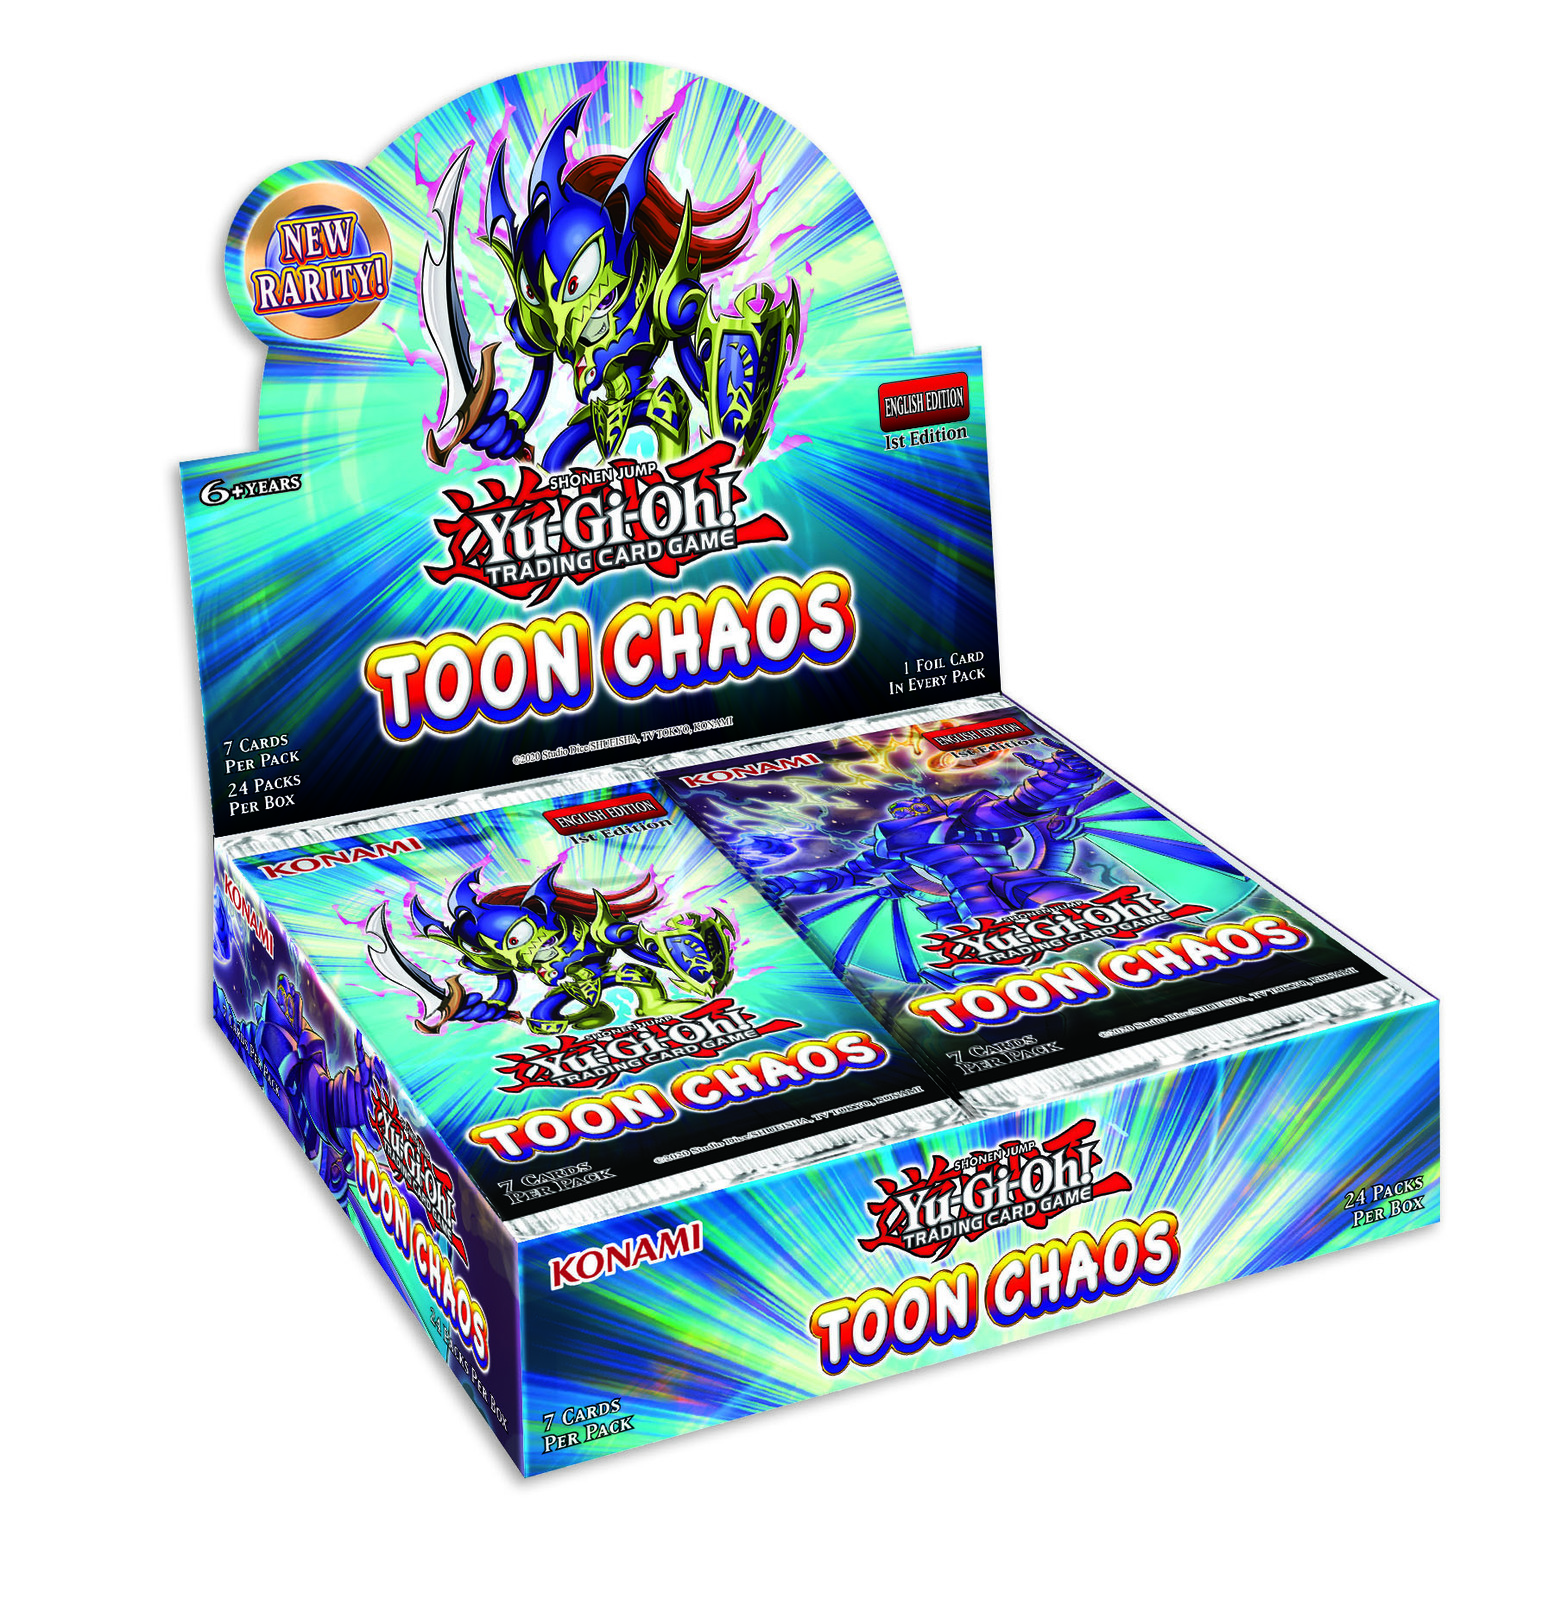 Toon Chaos Booster Box